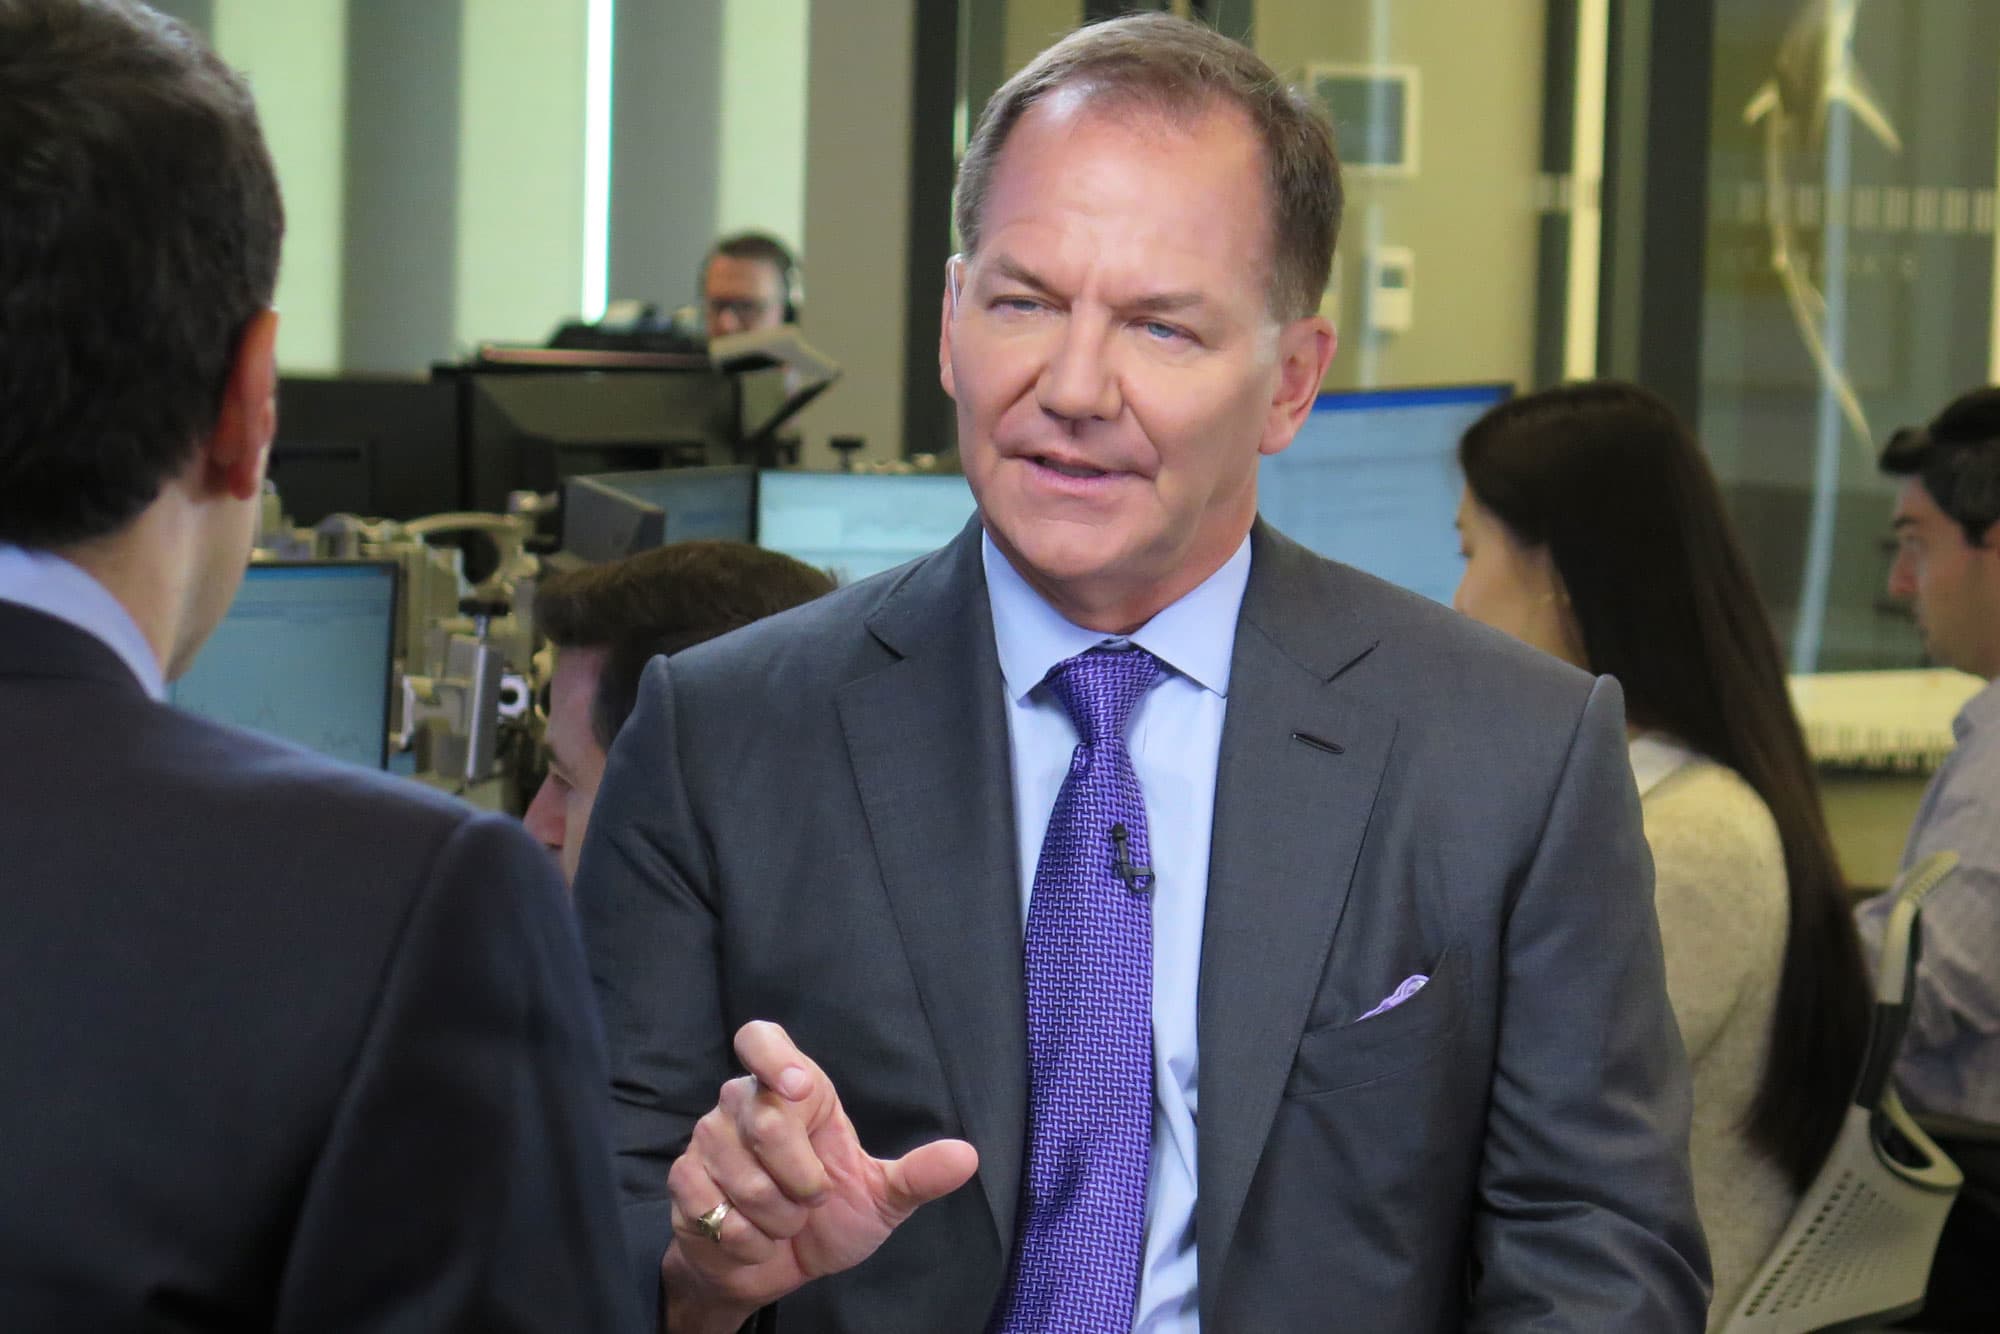 Paul Tudor Jones says crypto is his preferred inflation hedge over gold right now